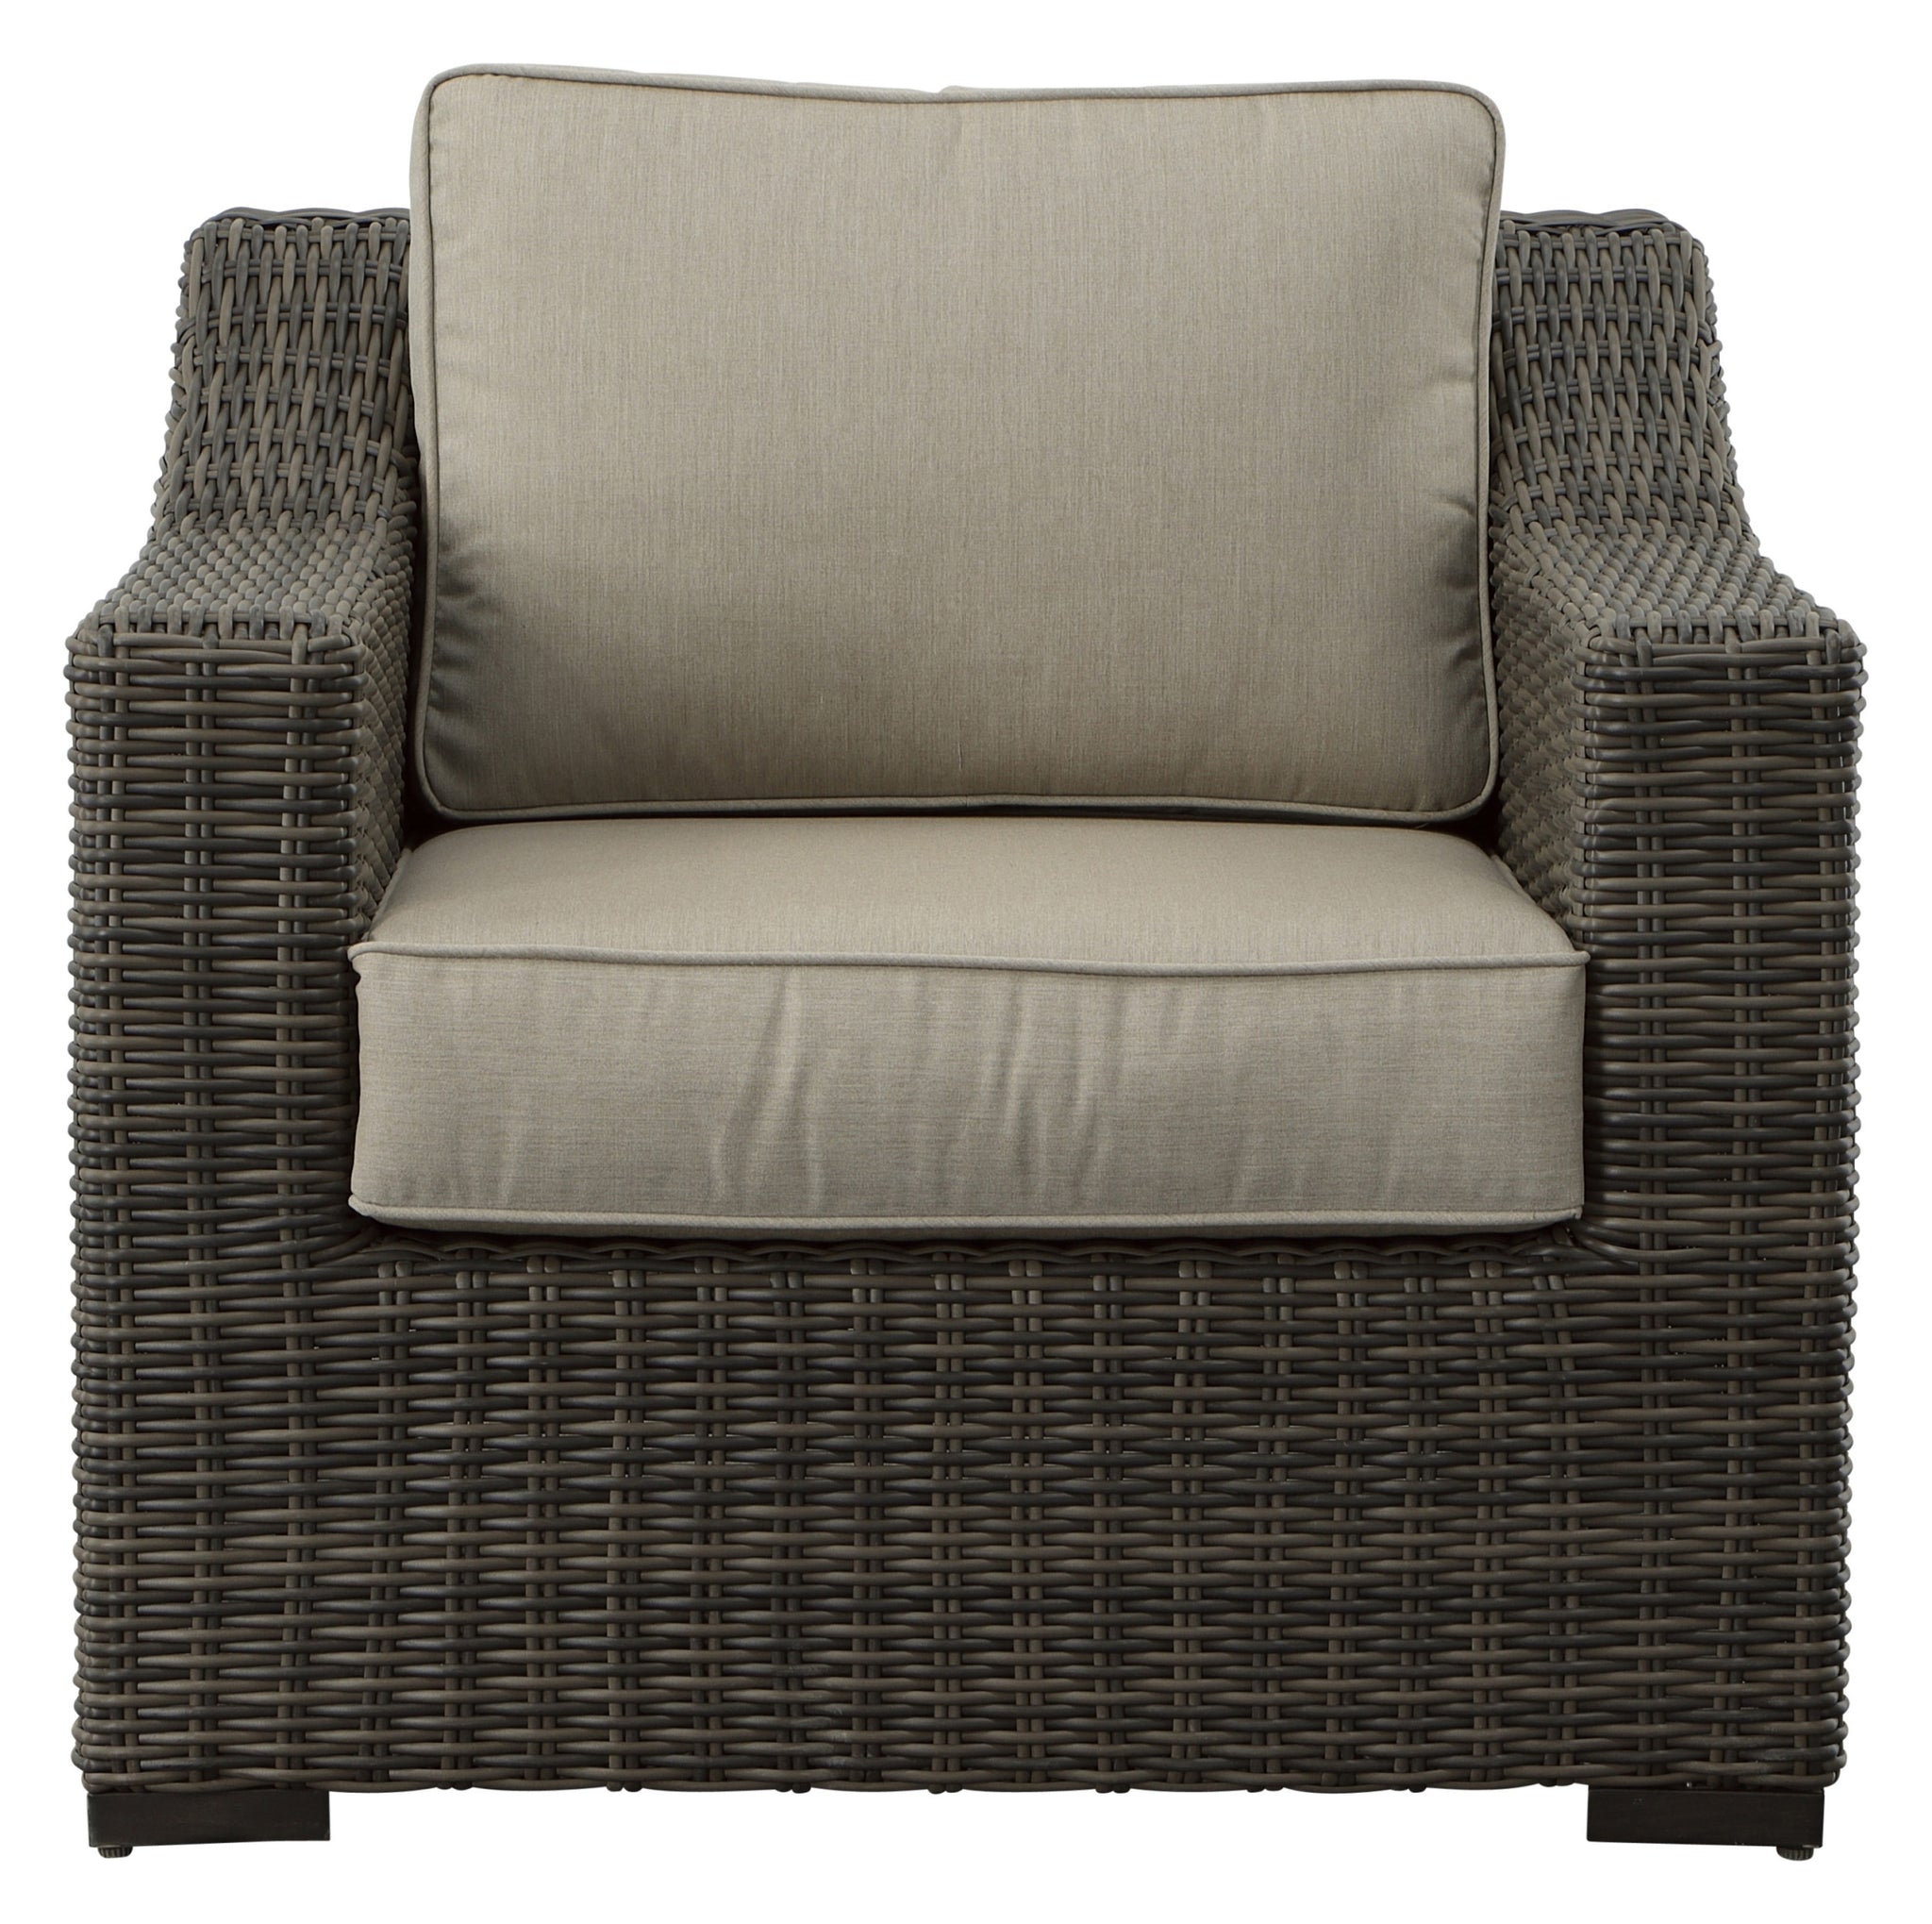 Luxurious Outdoor Lounge Chair Thick Cushioning,